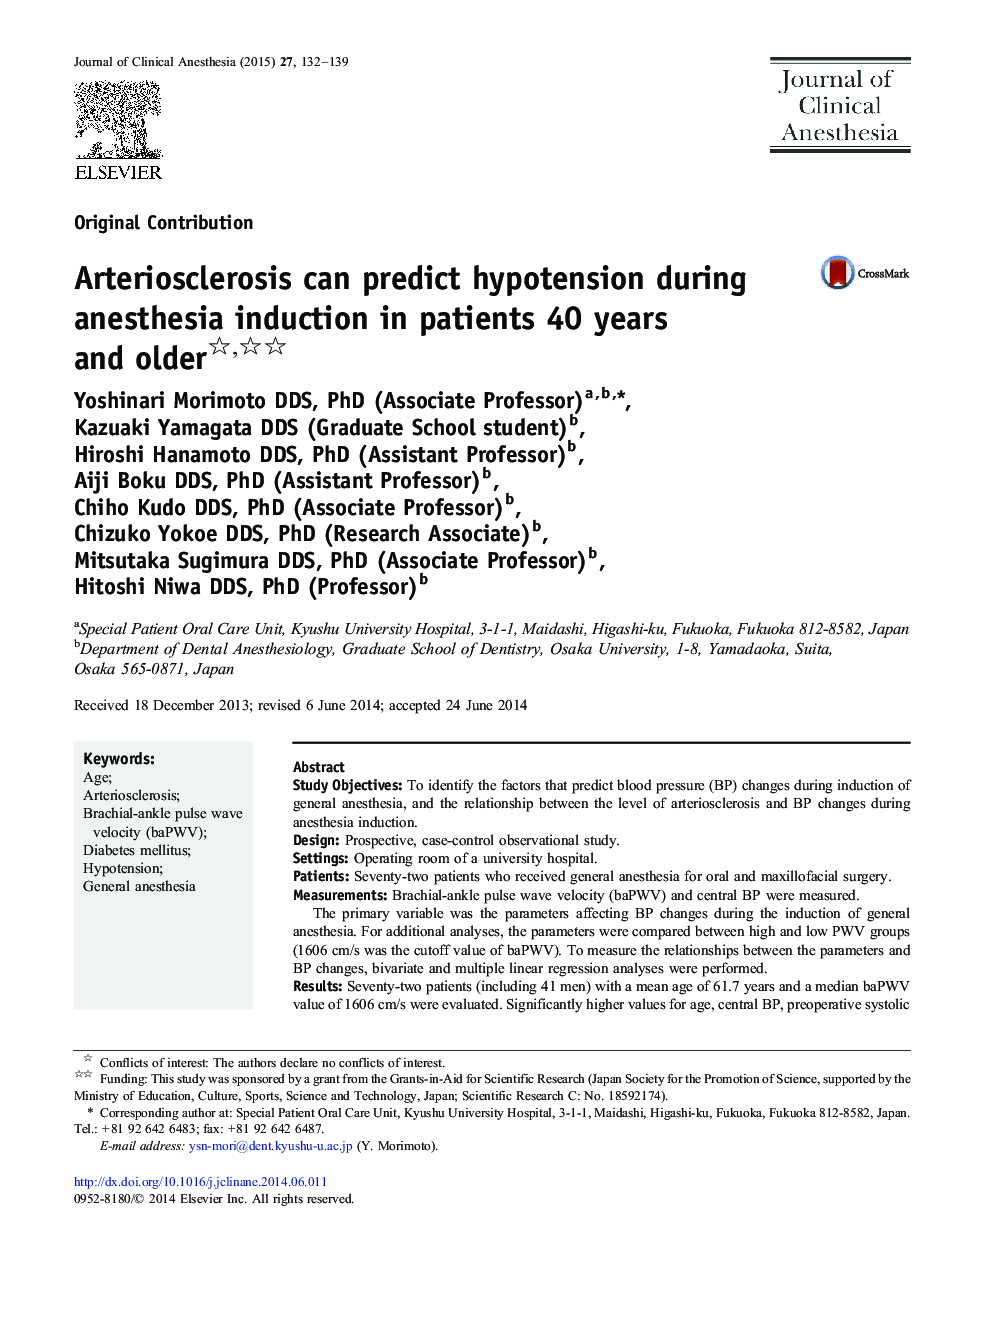 Arteriosclerosis can predict hypotension during anesthesia induction in patients 40 years and older 